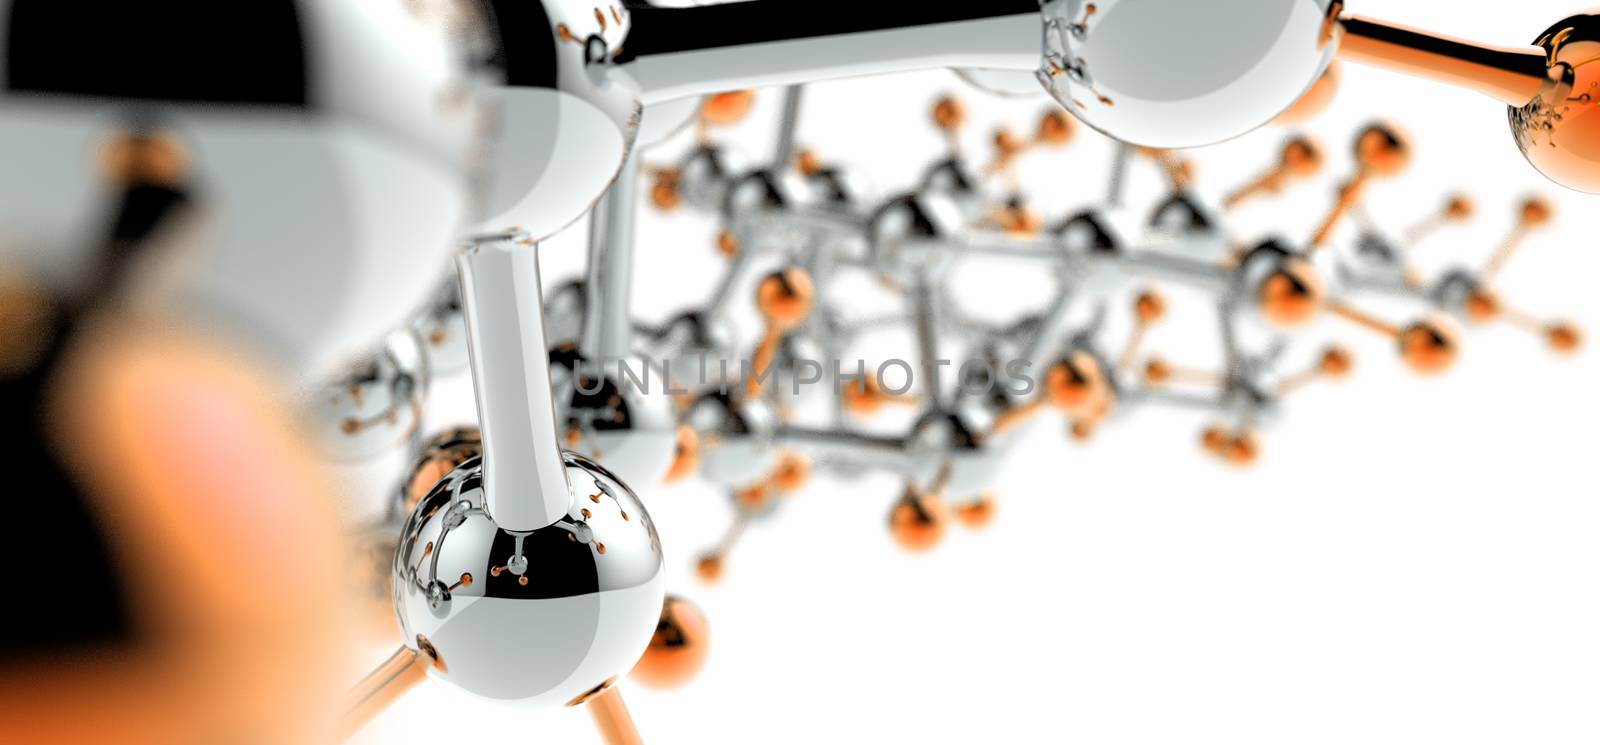 molecule 3d mediacal by everythingpossible